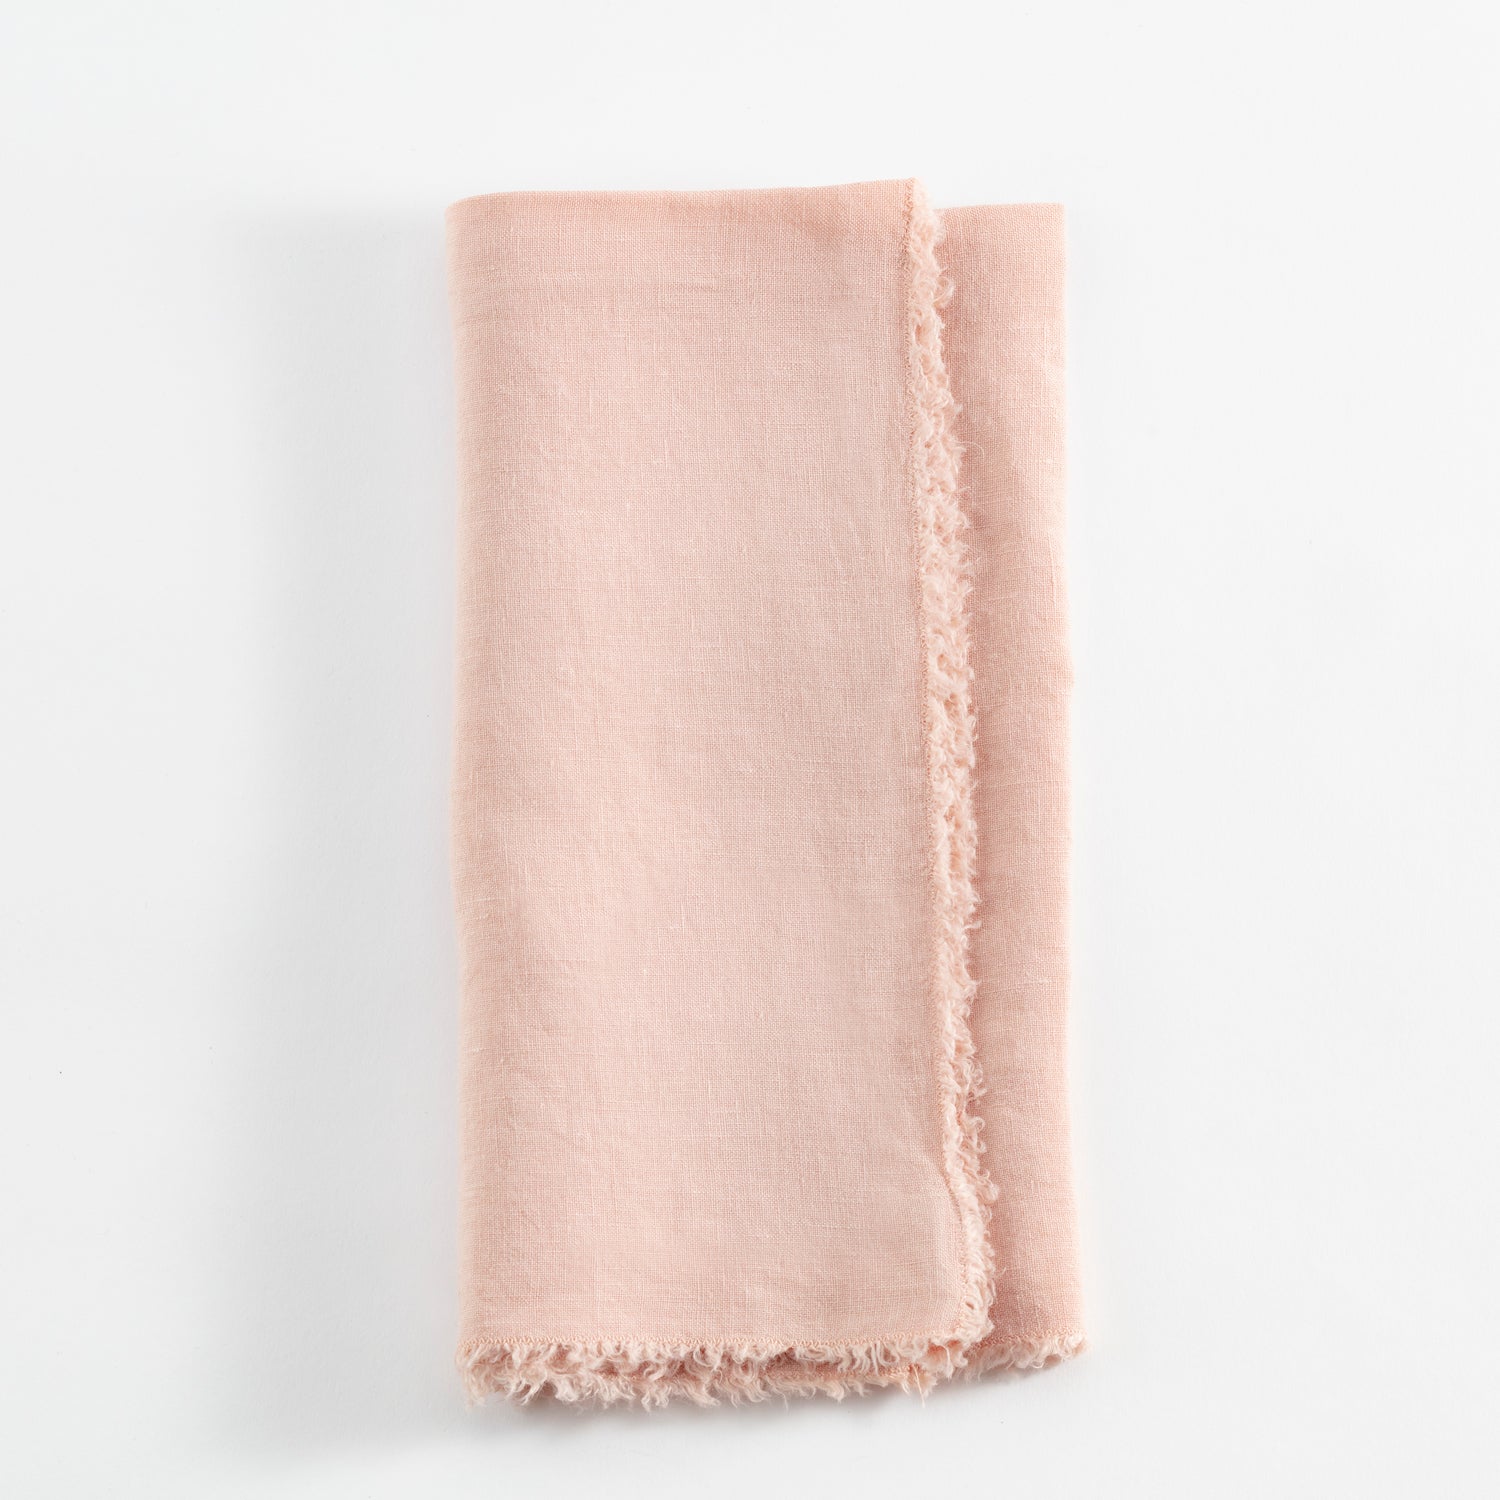 Soft pink sheer fabric with frayed edges on white background.